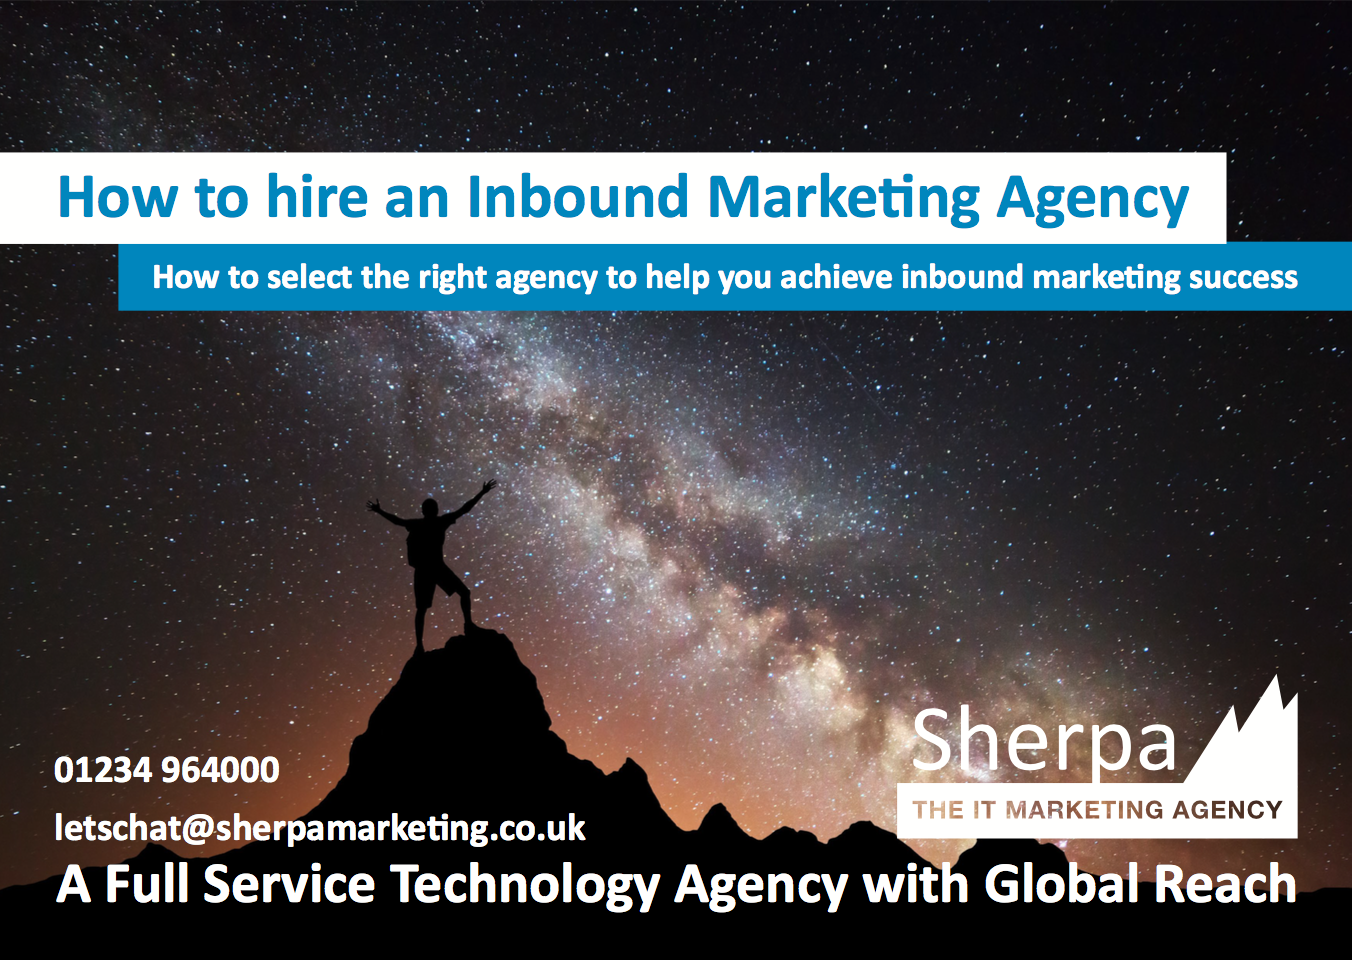 How to hire an Inbound Marketing Agency